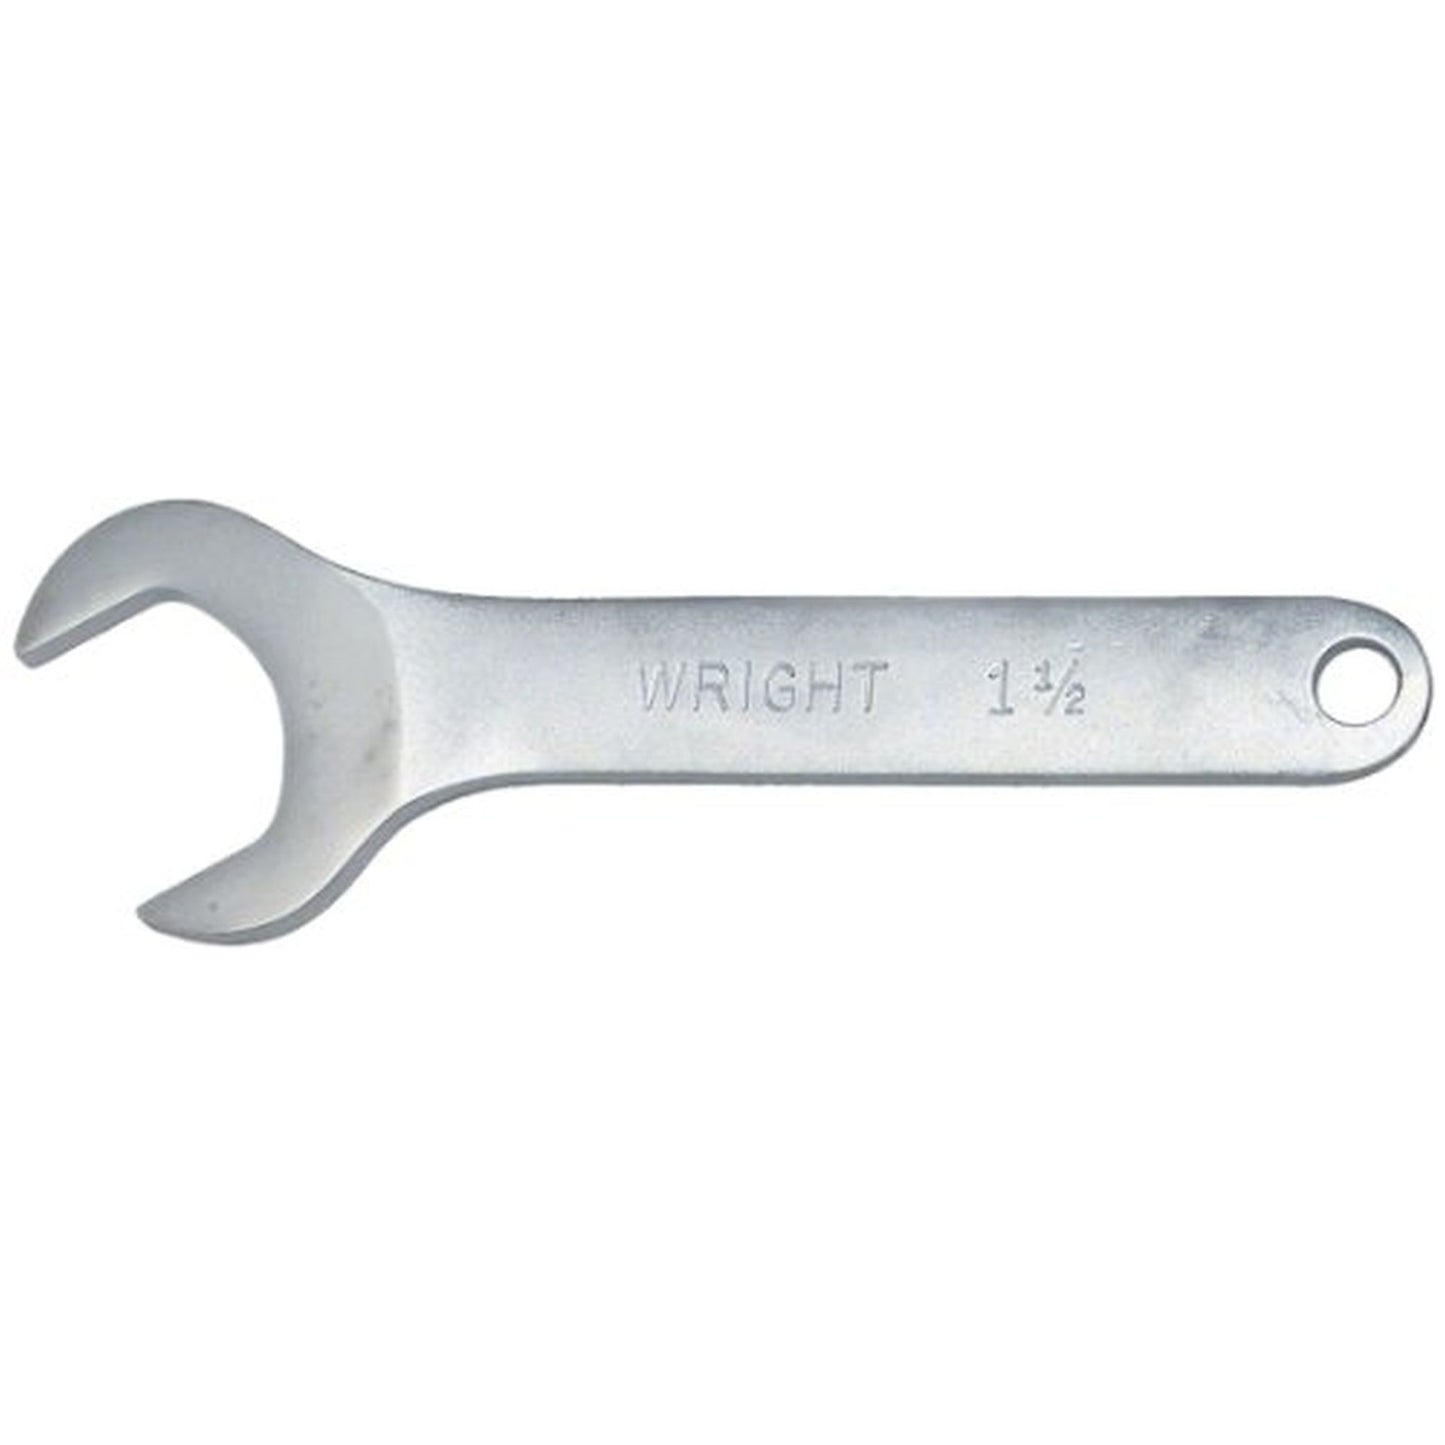 Wright Tool, 1-1/2in. Satin Finish 30-Degree Service Wrench, Pieces (qty.) 1, Tool Length 1.5 in, Measurement Standard Standard (SAE), Model# 1448